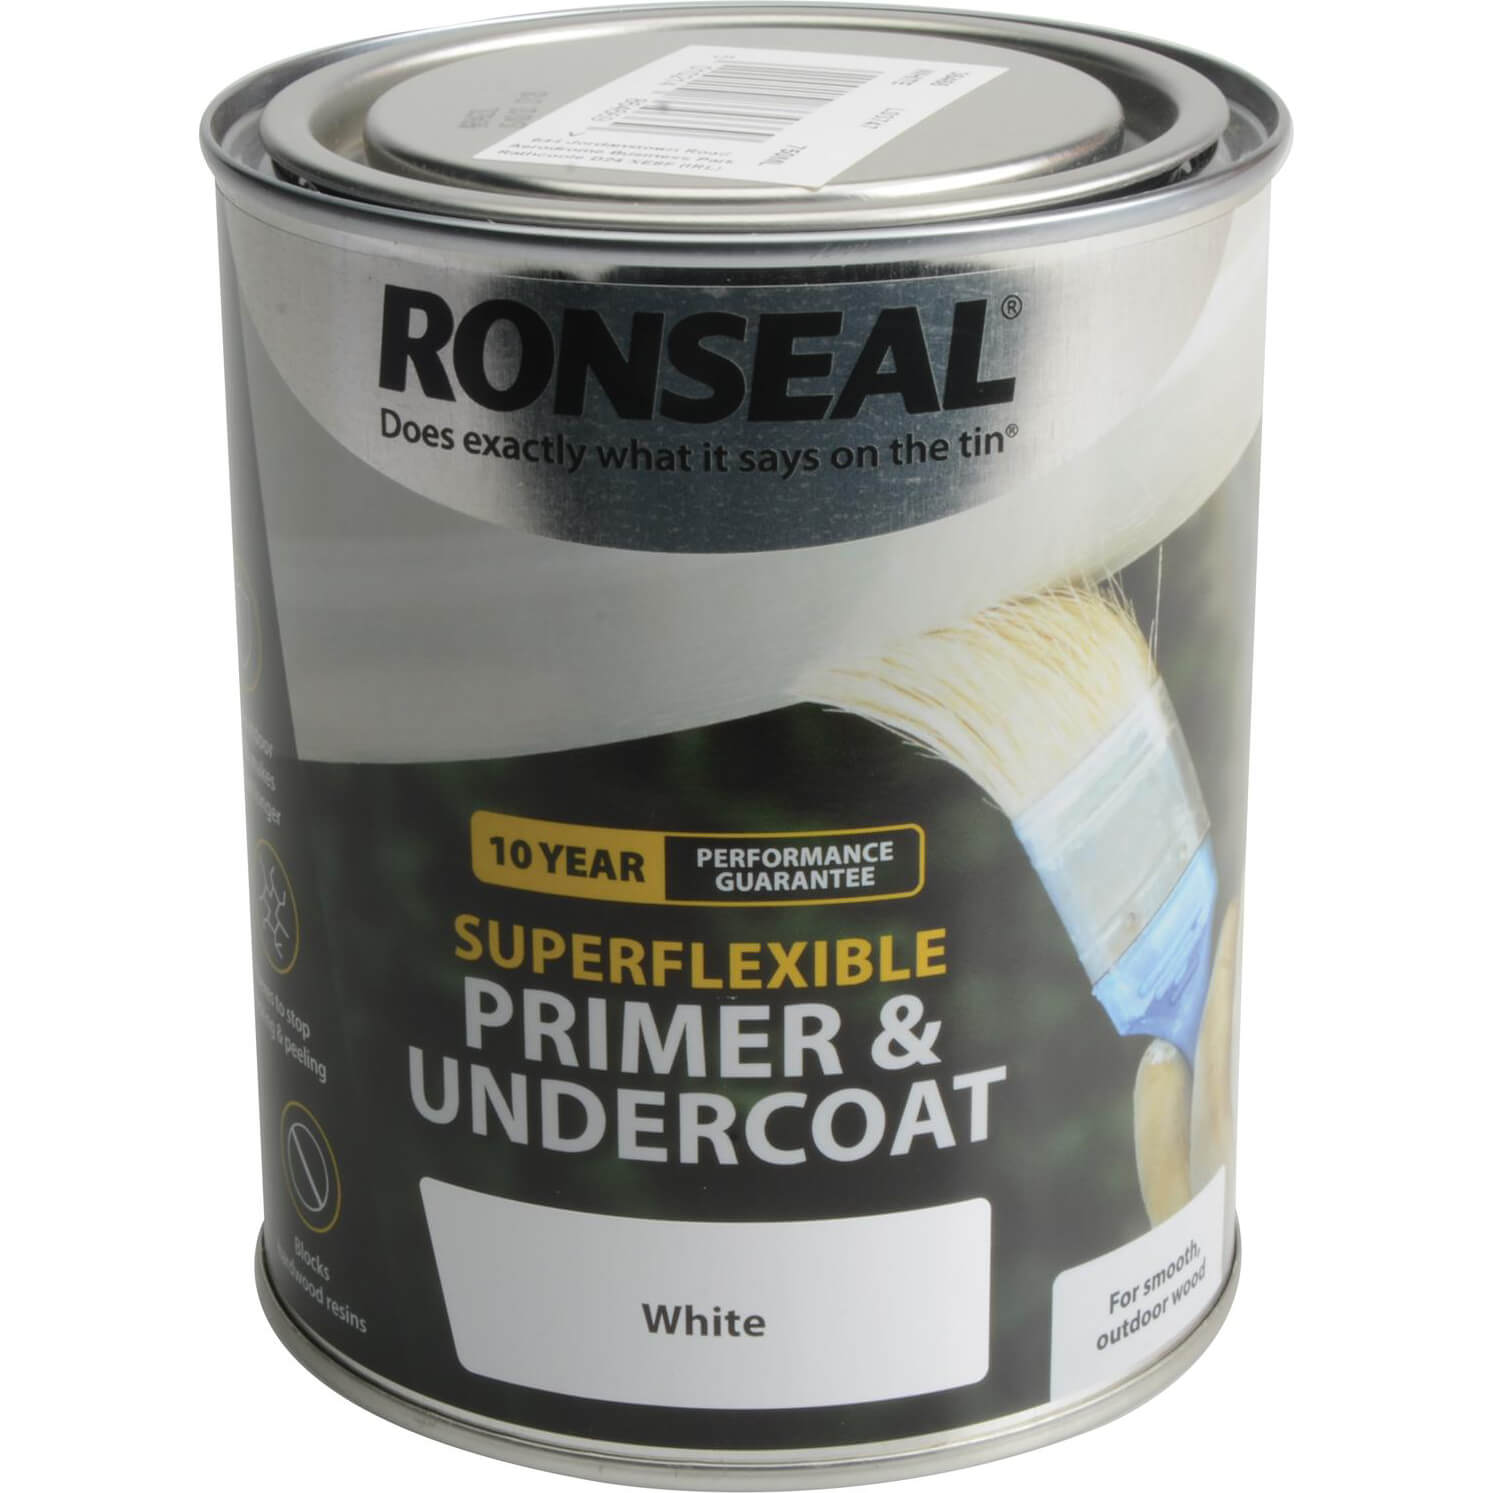 Image of Ronseal Super Flexible Wood Primer and Undercoat White 750ml